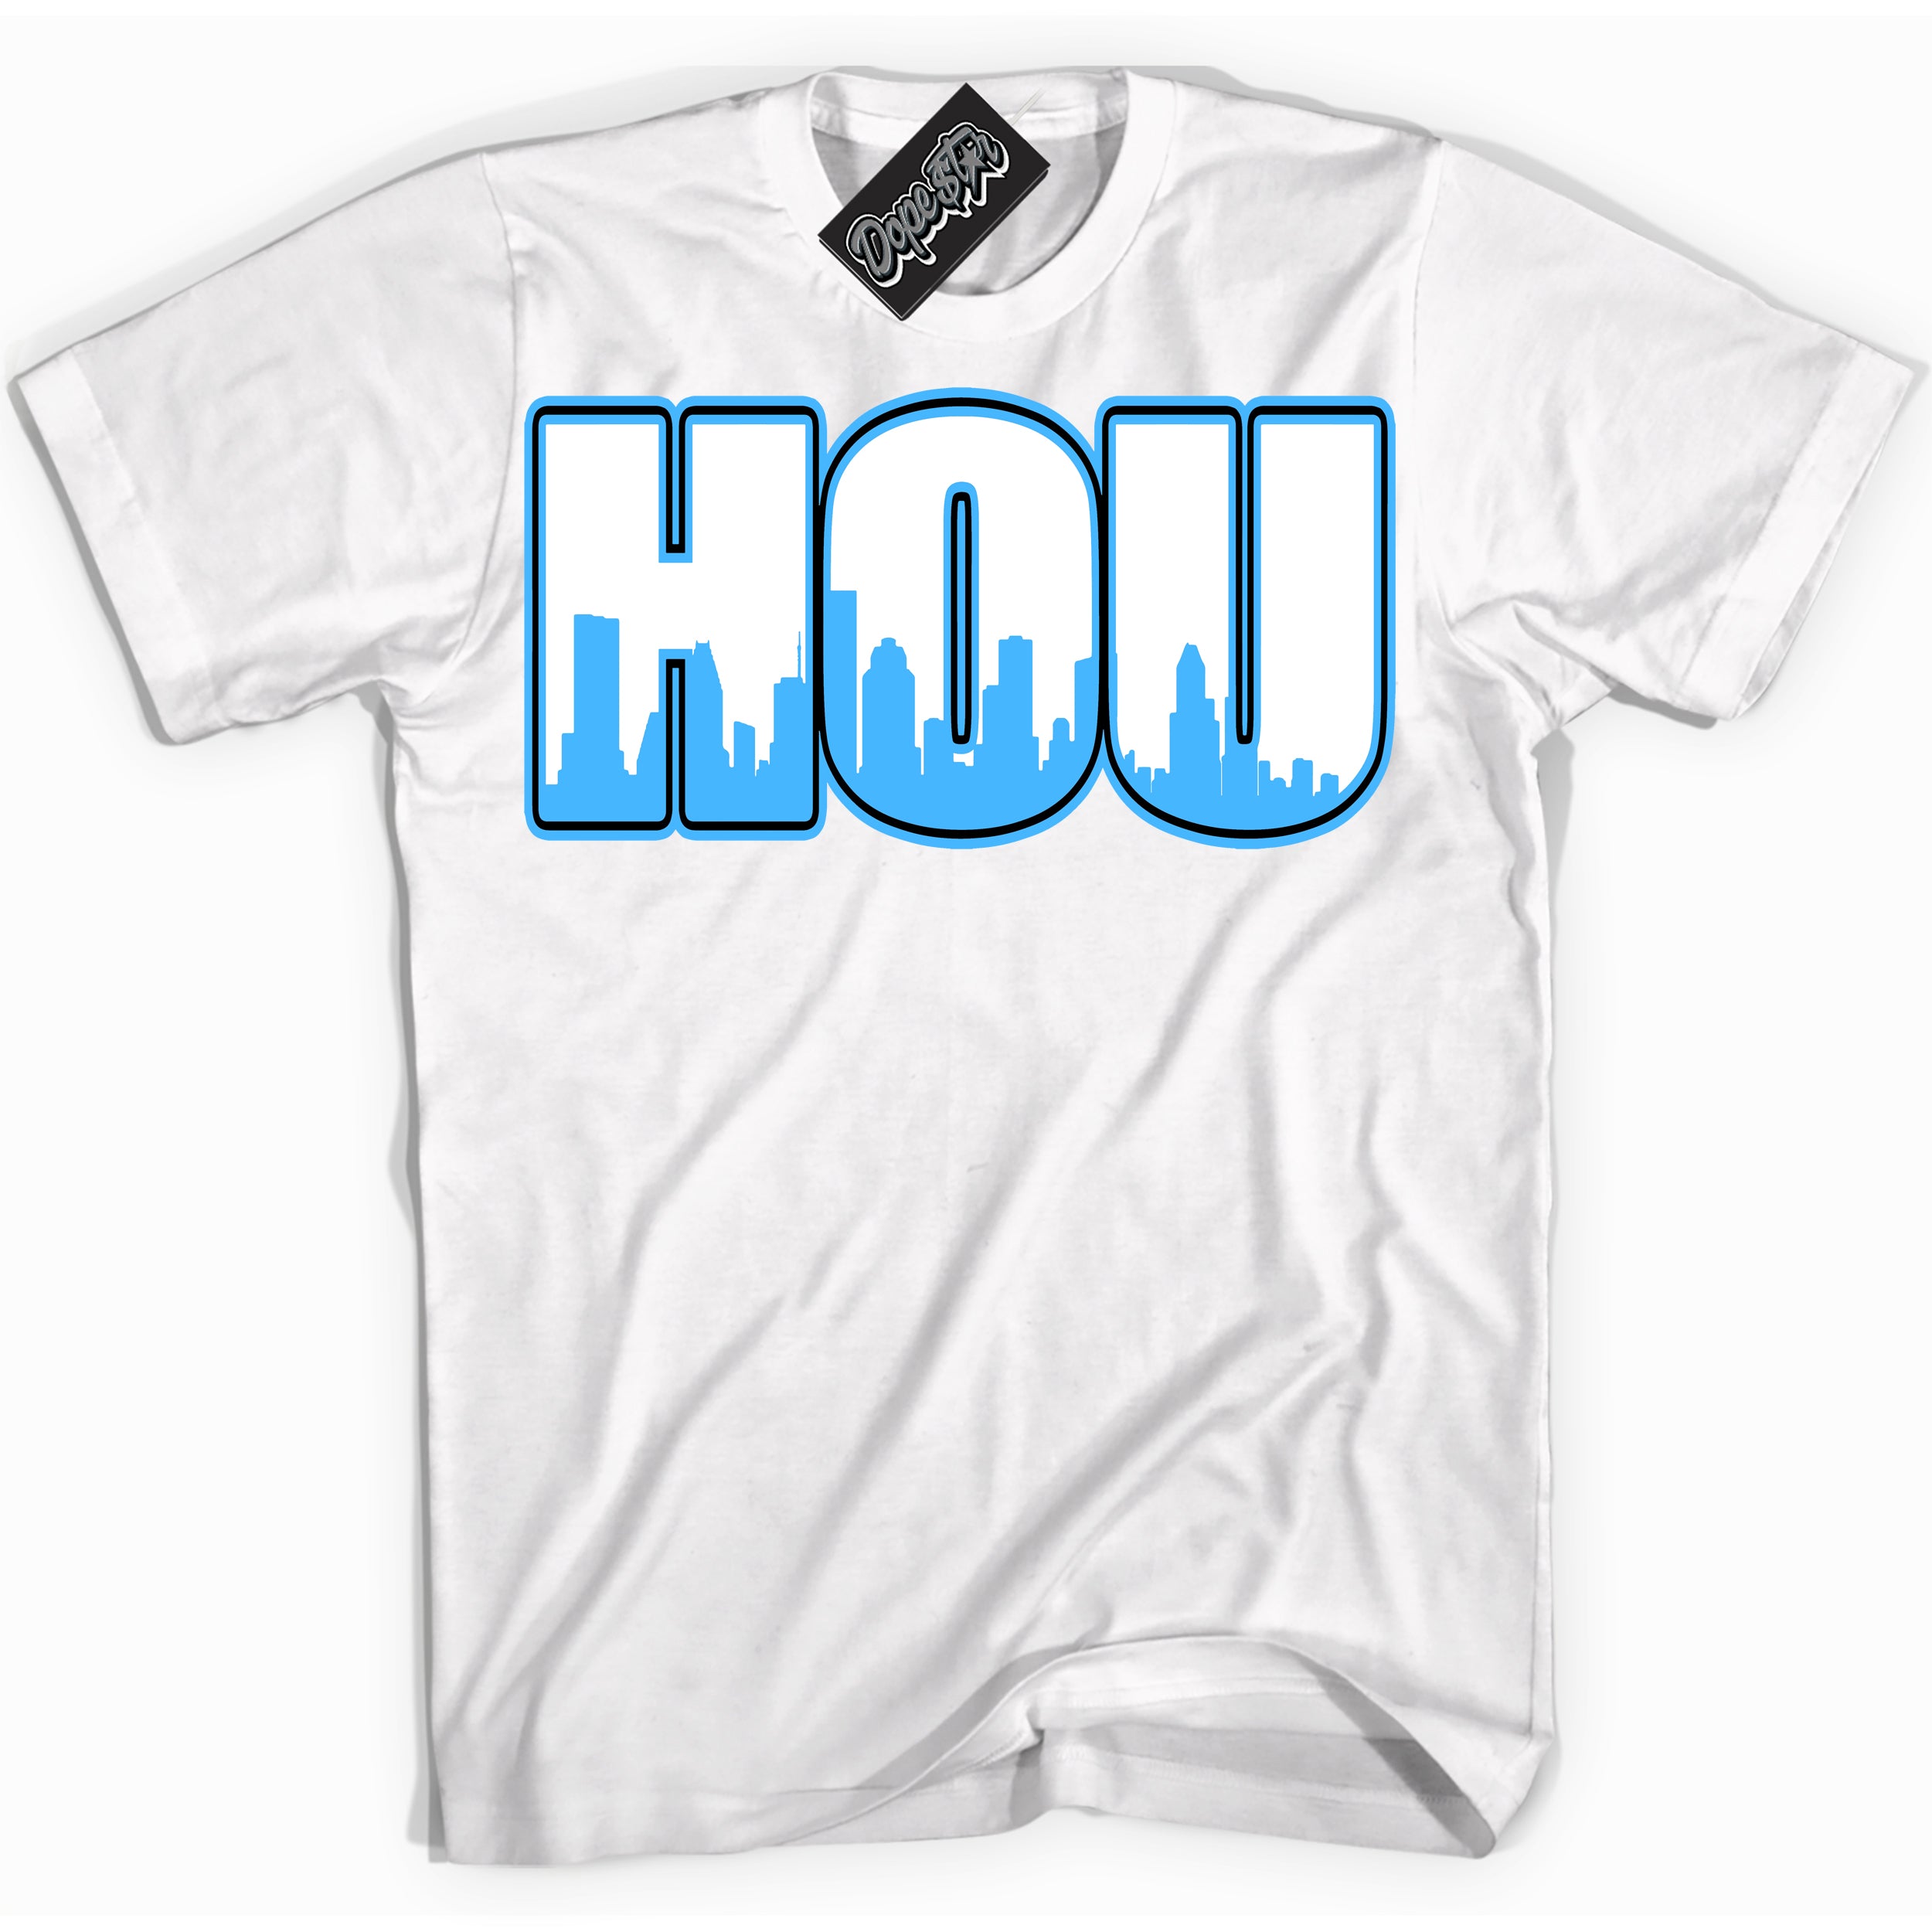 Cool White graphic tee with “ Houston ” design, that perfectly matches Powder Blue 9s sneakers 